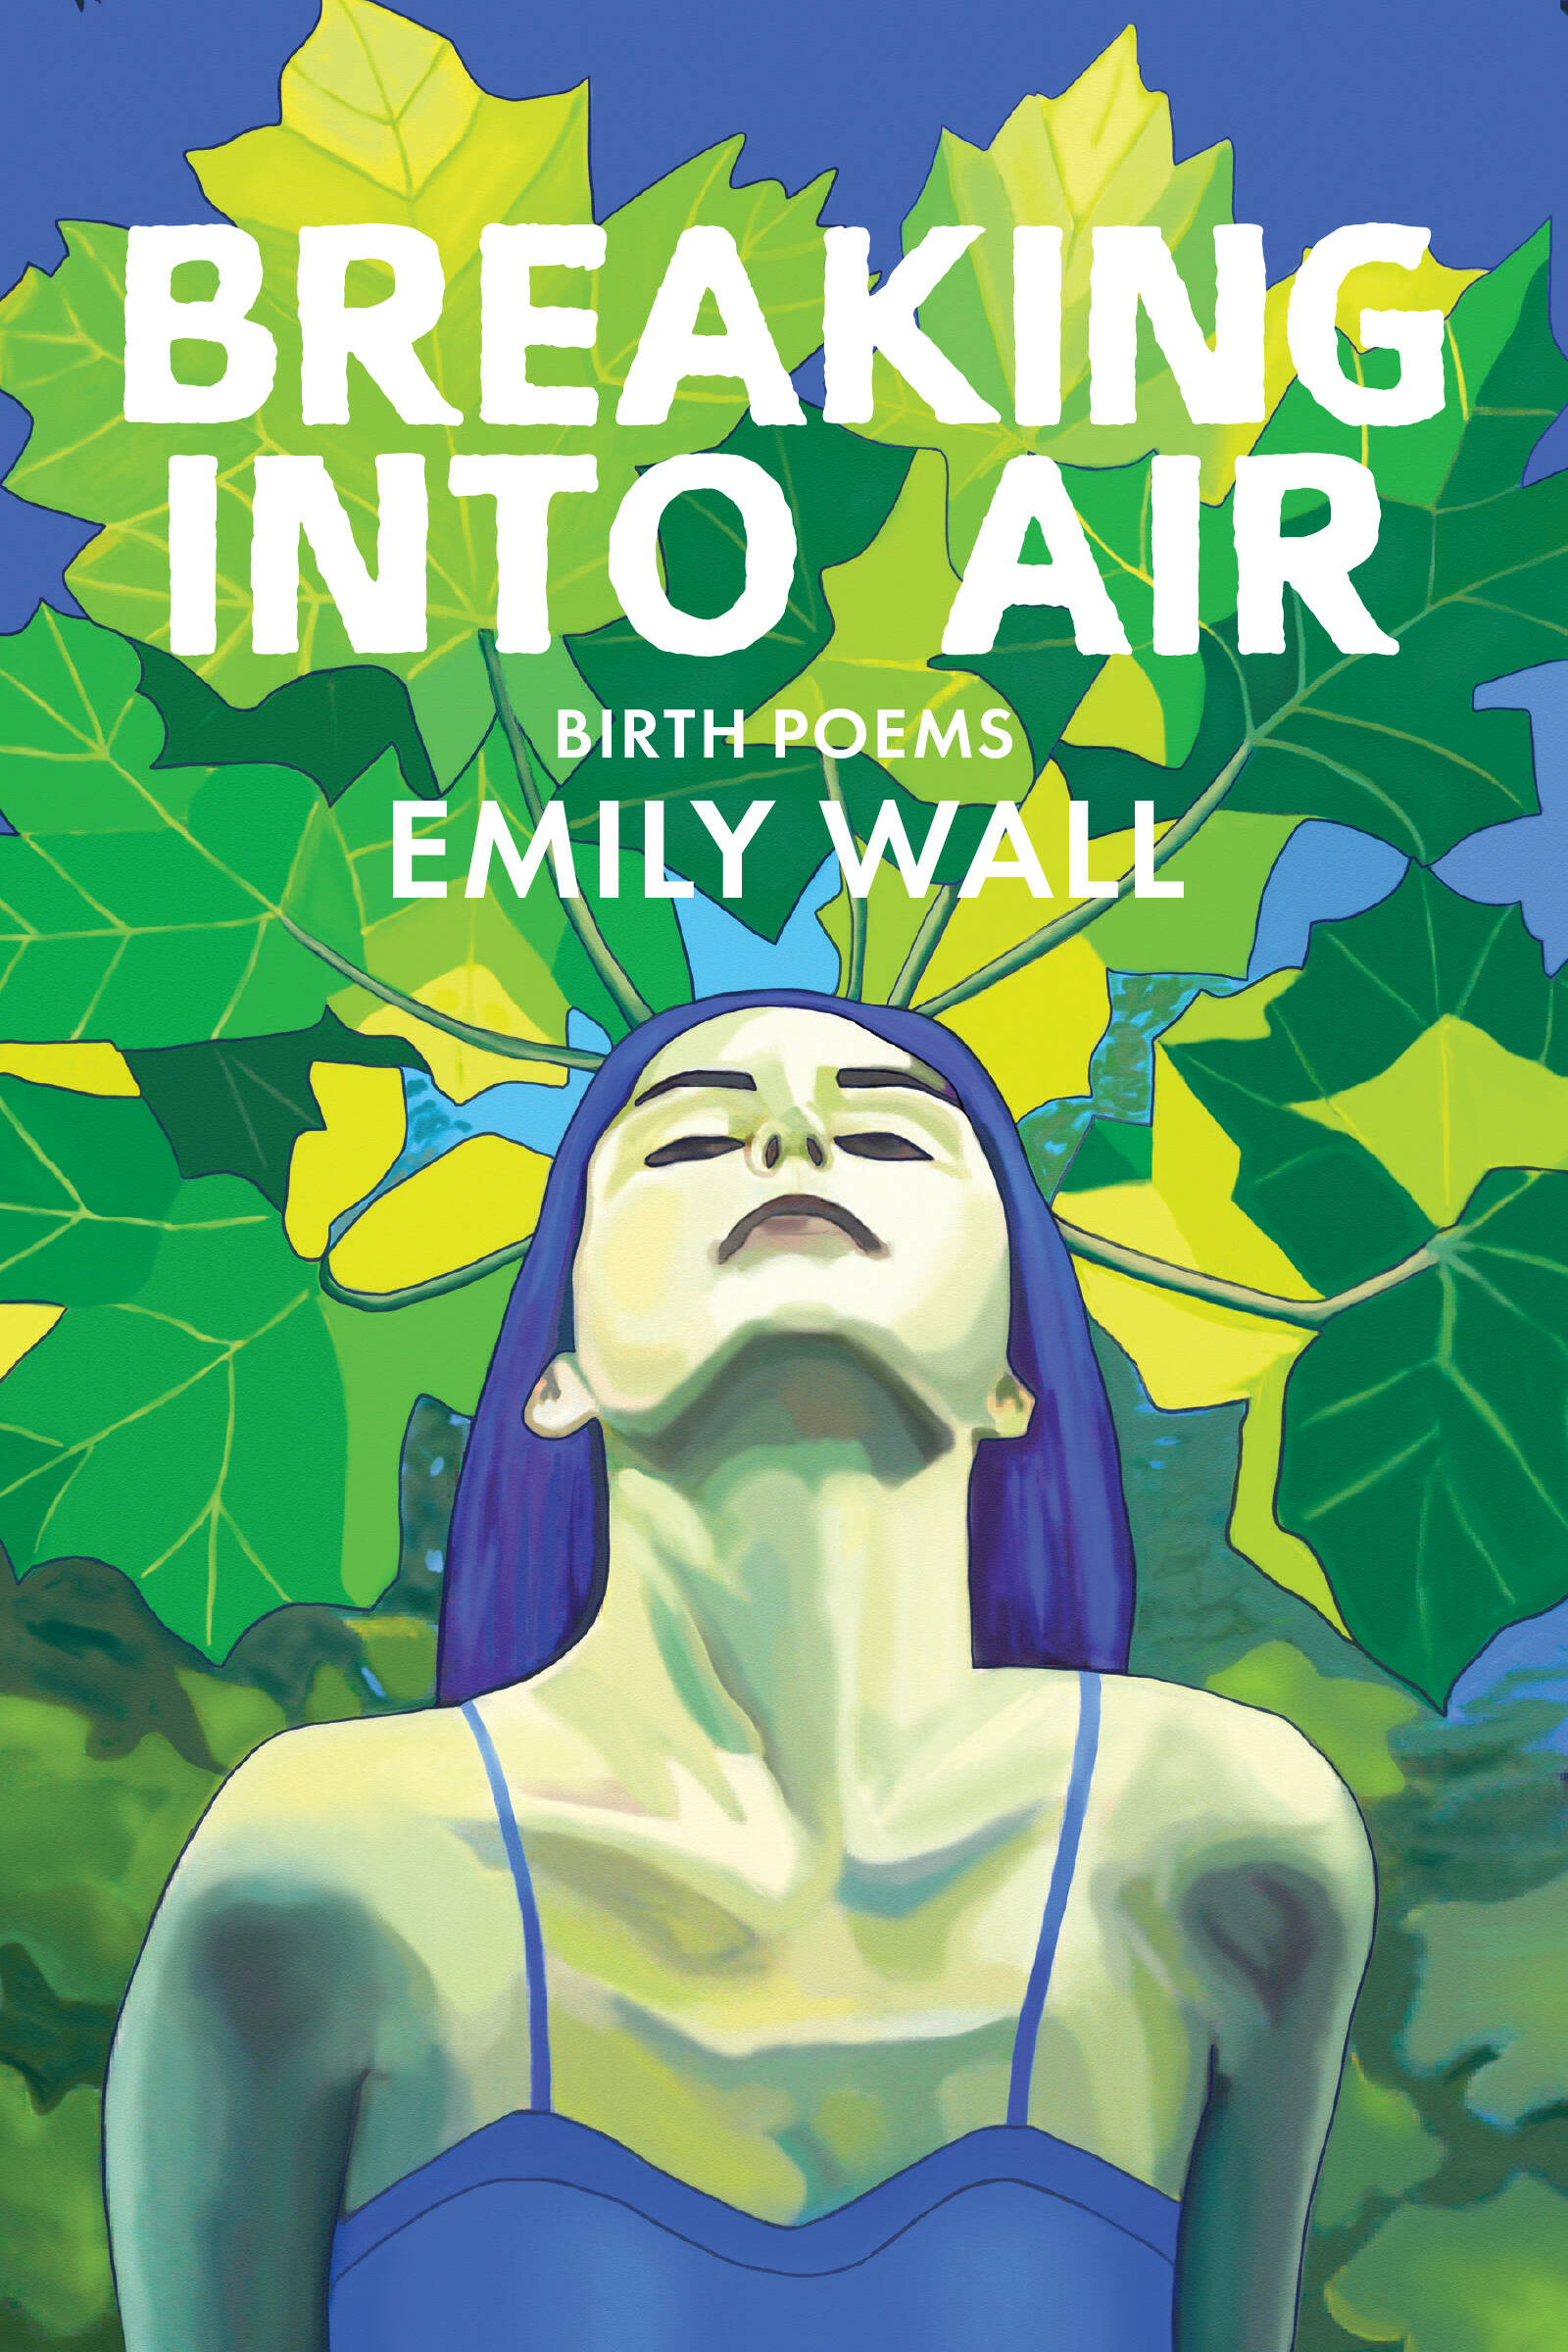 Courtesy Photo
This image shows the cover of Juneau poet Emily Wall’s new book “Breaking Into Air.” The book published by Red Hen Press details a wide array of different birth stories.